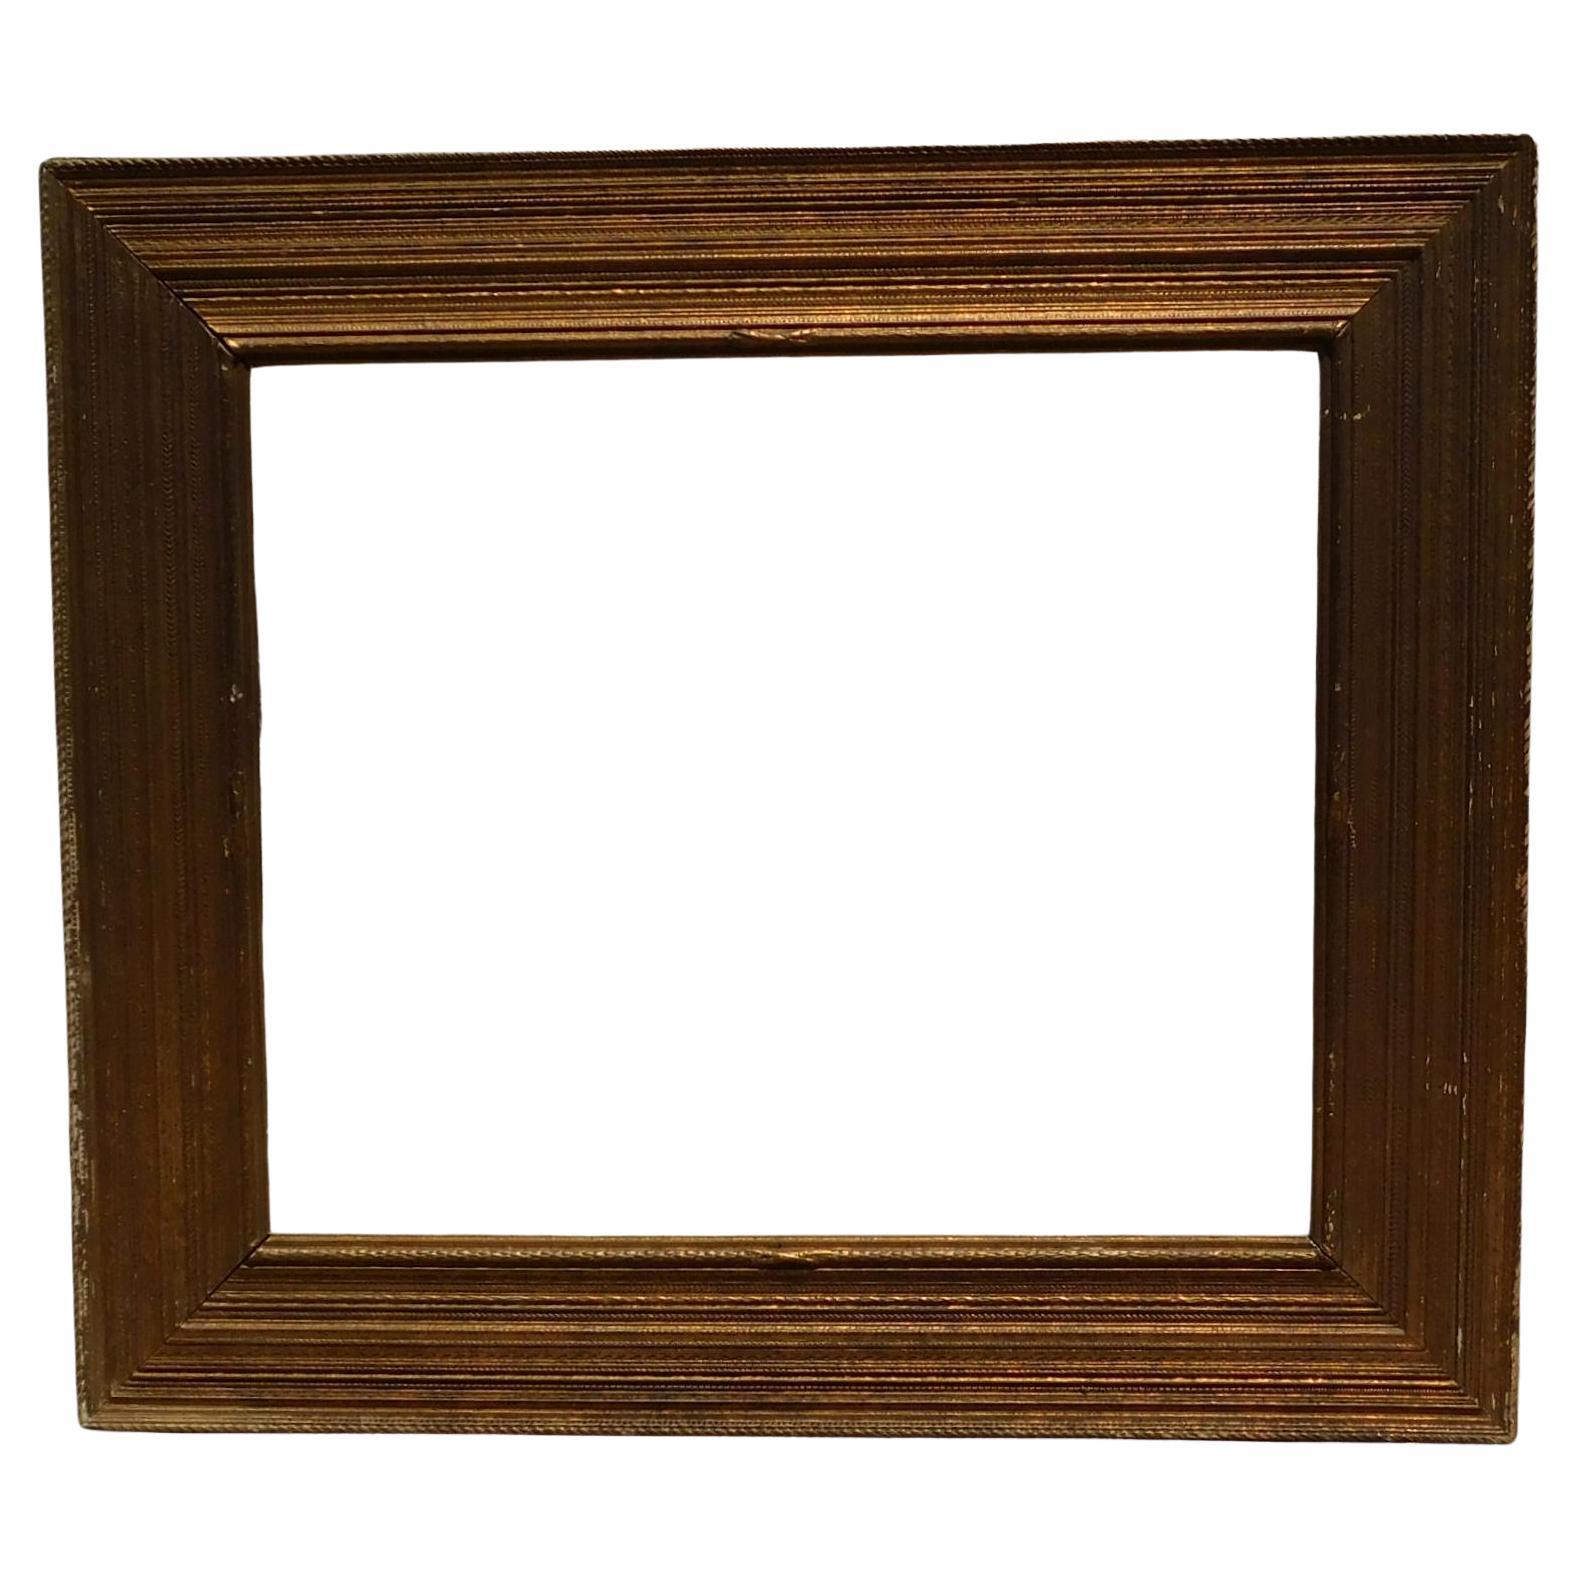 Large Newcomb Macklin American Painting Frame Stanford White Design, 1915 - 1920 For Sale